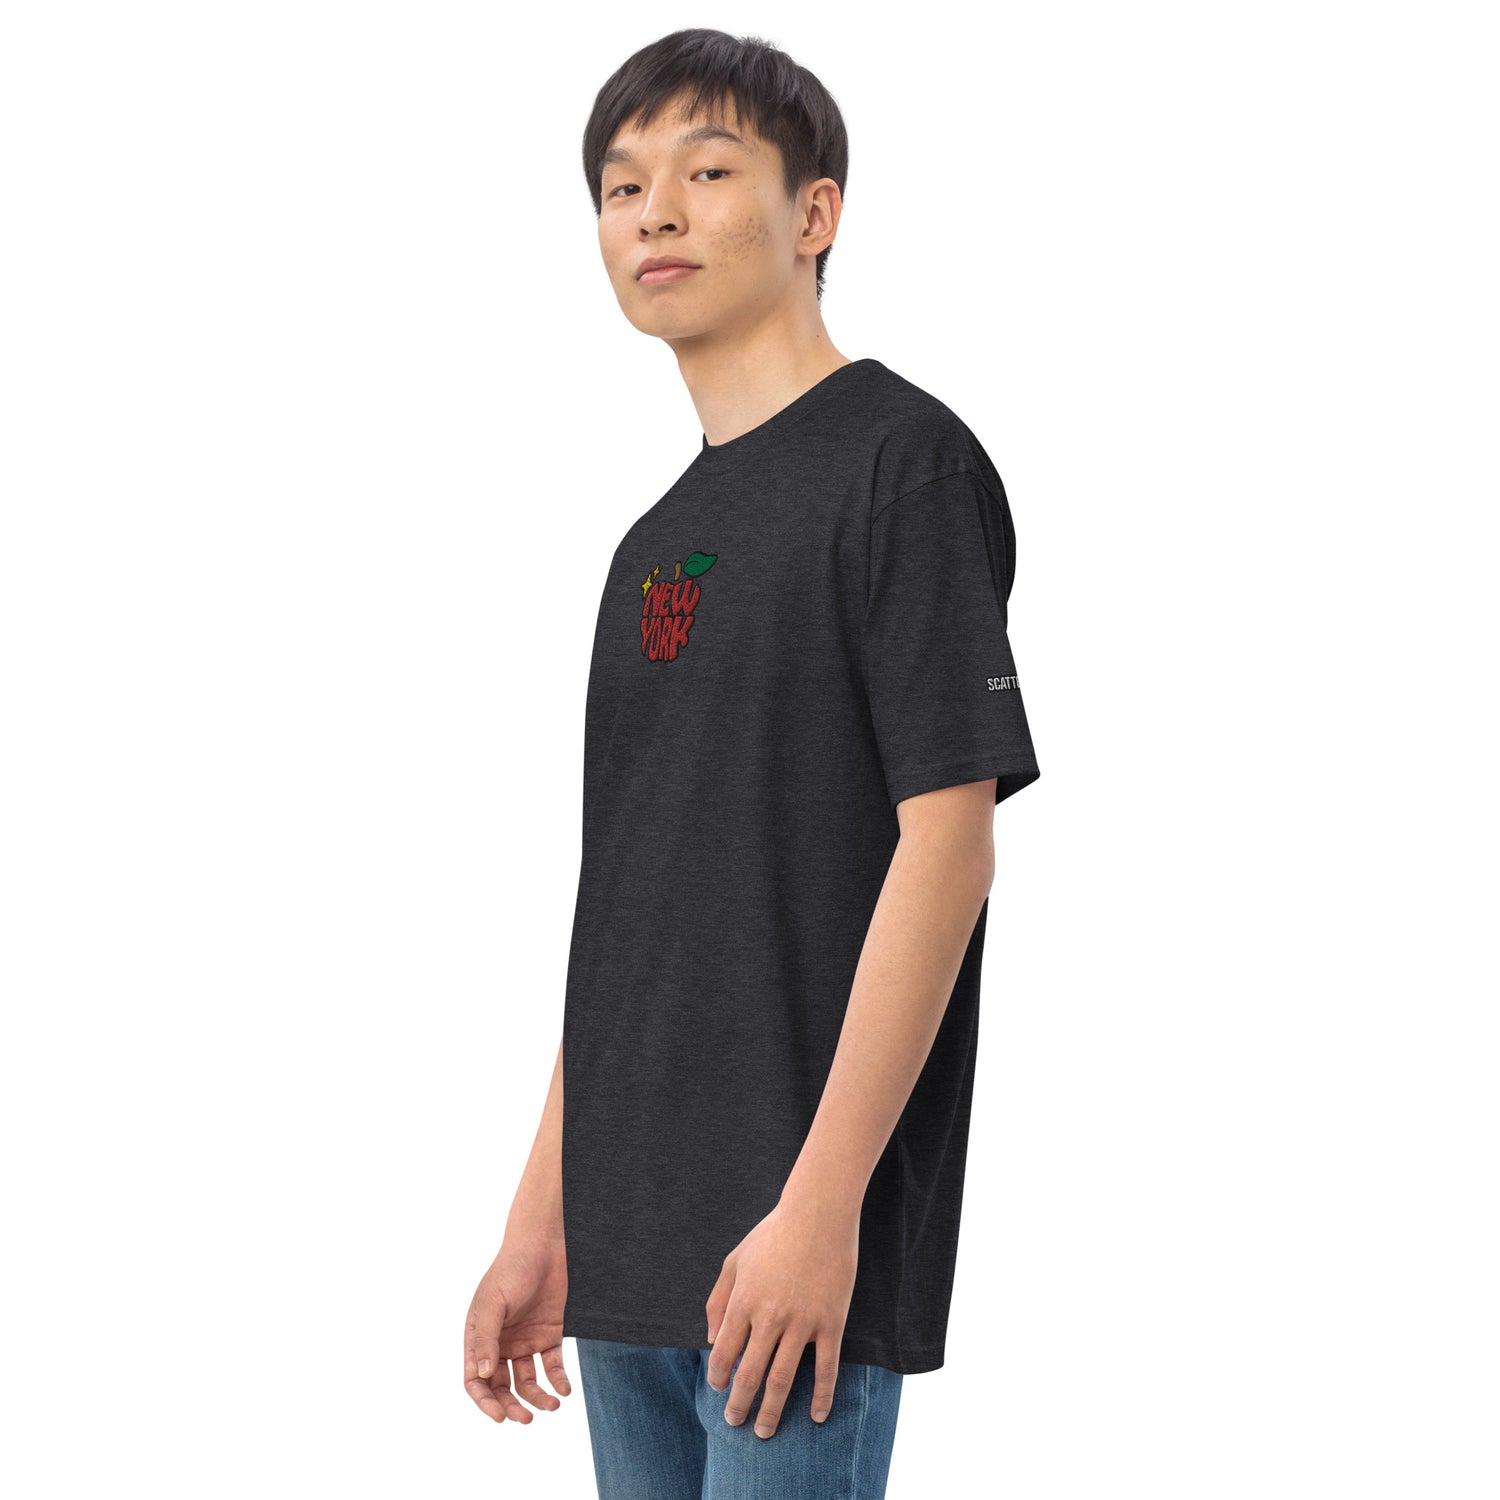 New York Apple Logo Embroidered Charcoal Grey T-Shirt Scattered Streetwear